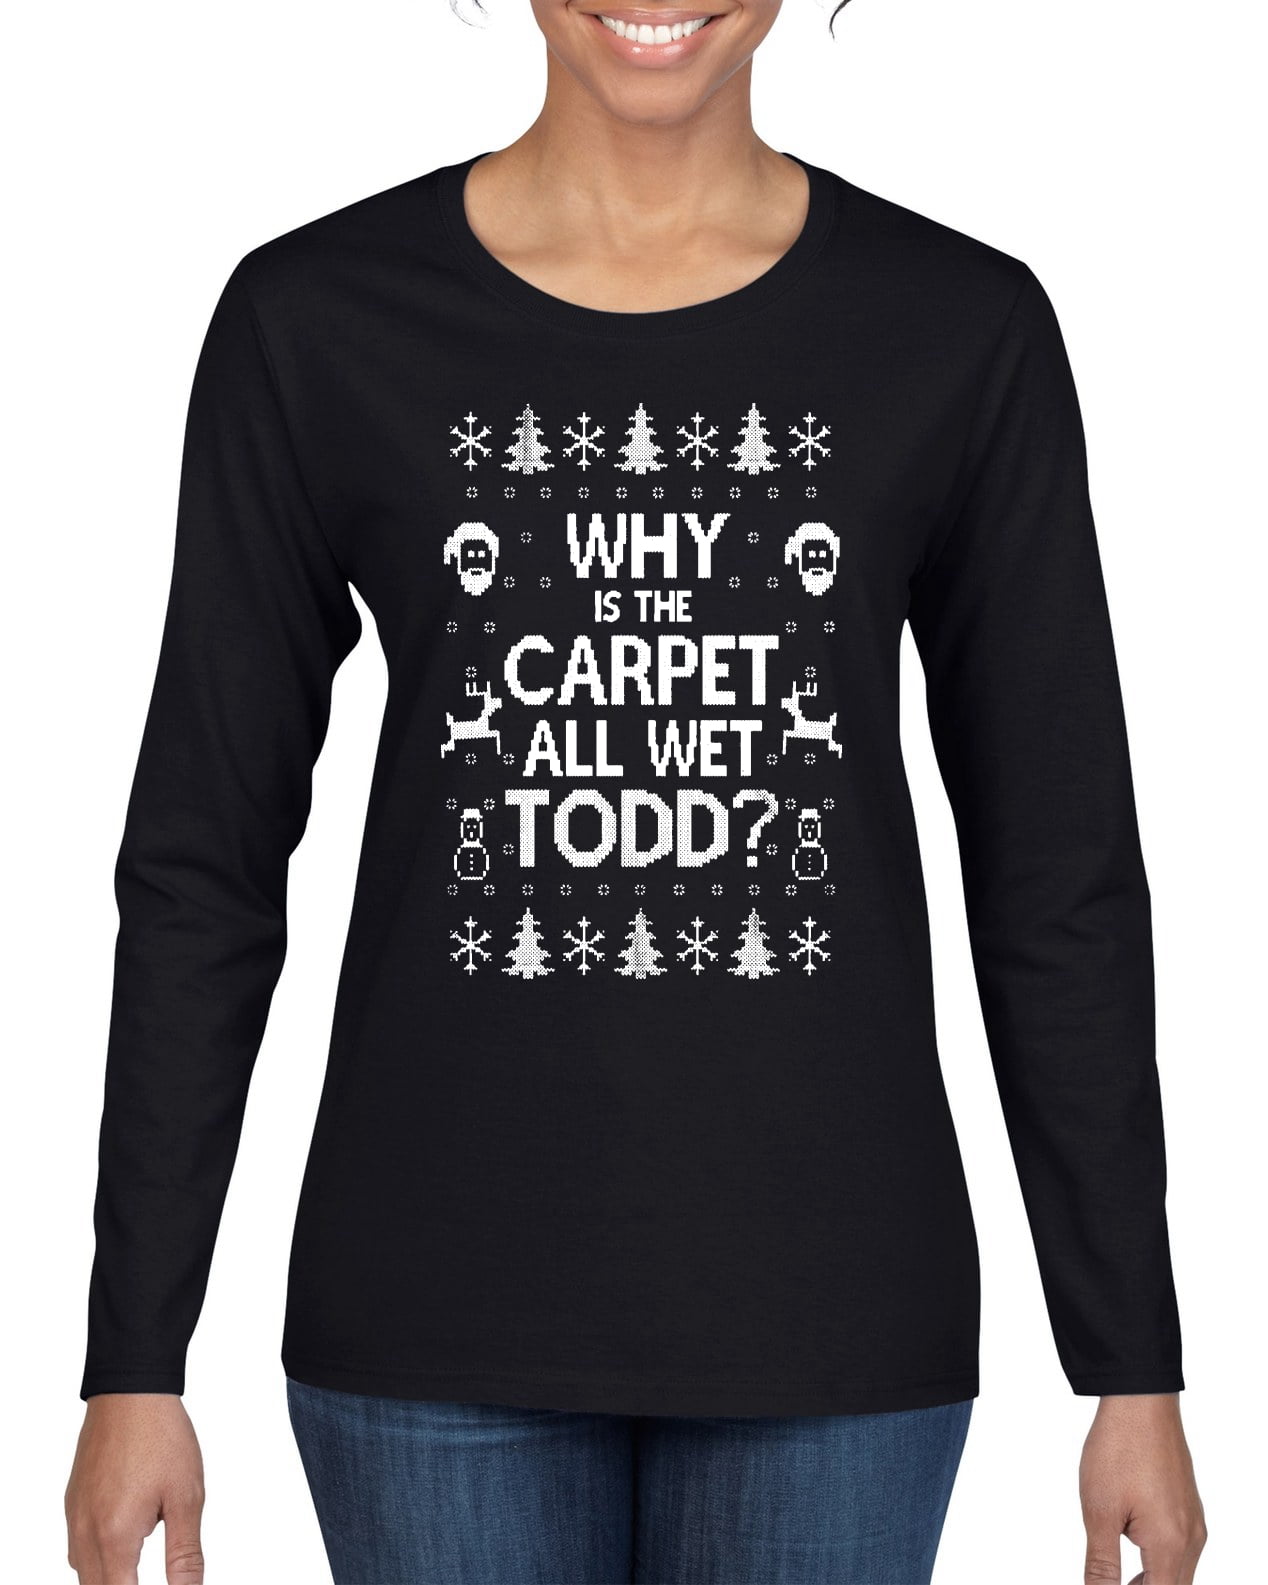 Christmas Vacation Xmas Top Sweatshirt Why Is The Carpet All Wet Todd Jumper?